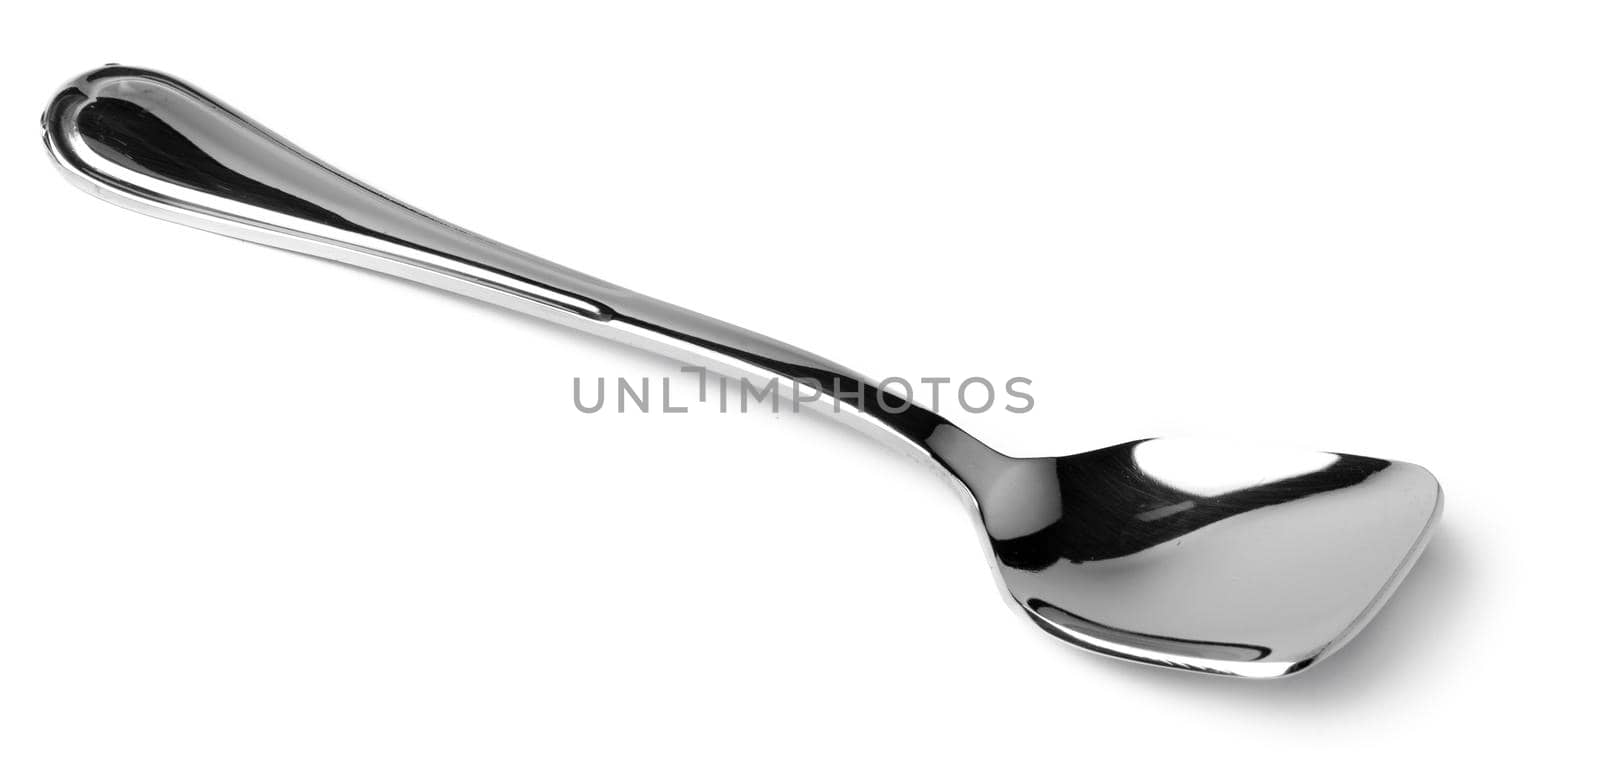 Silver spoon isolated on white background close up by Fabrikasimf